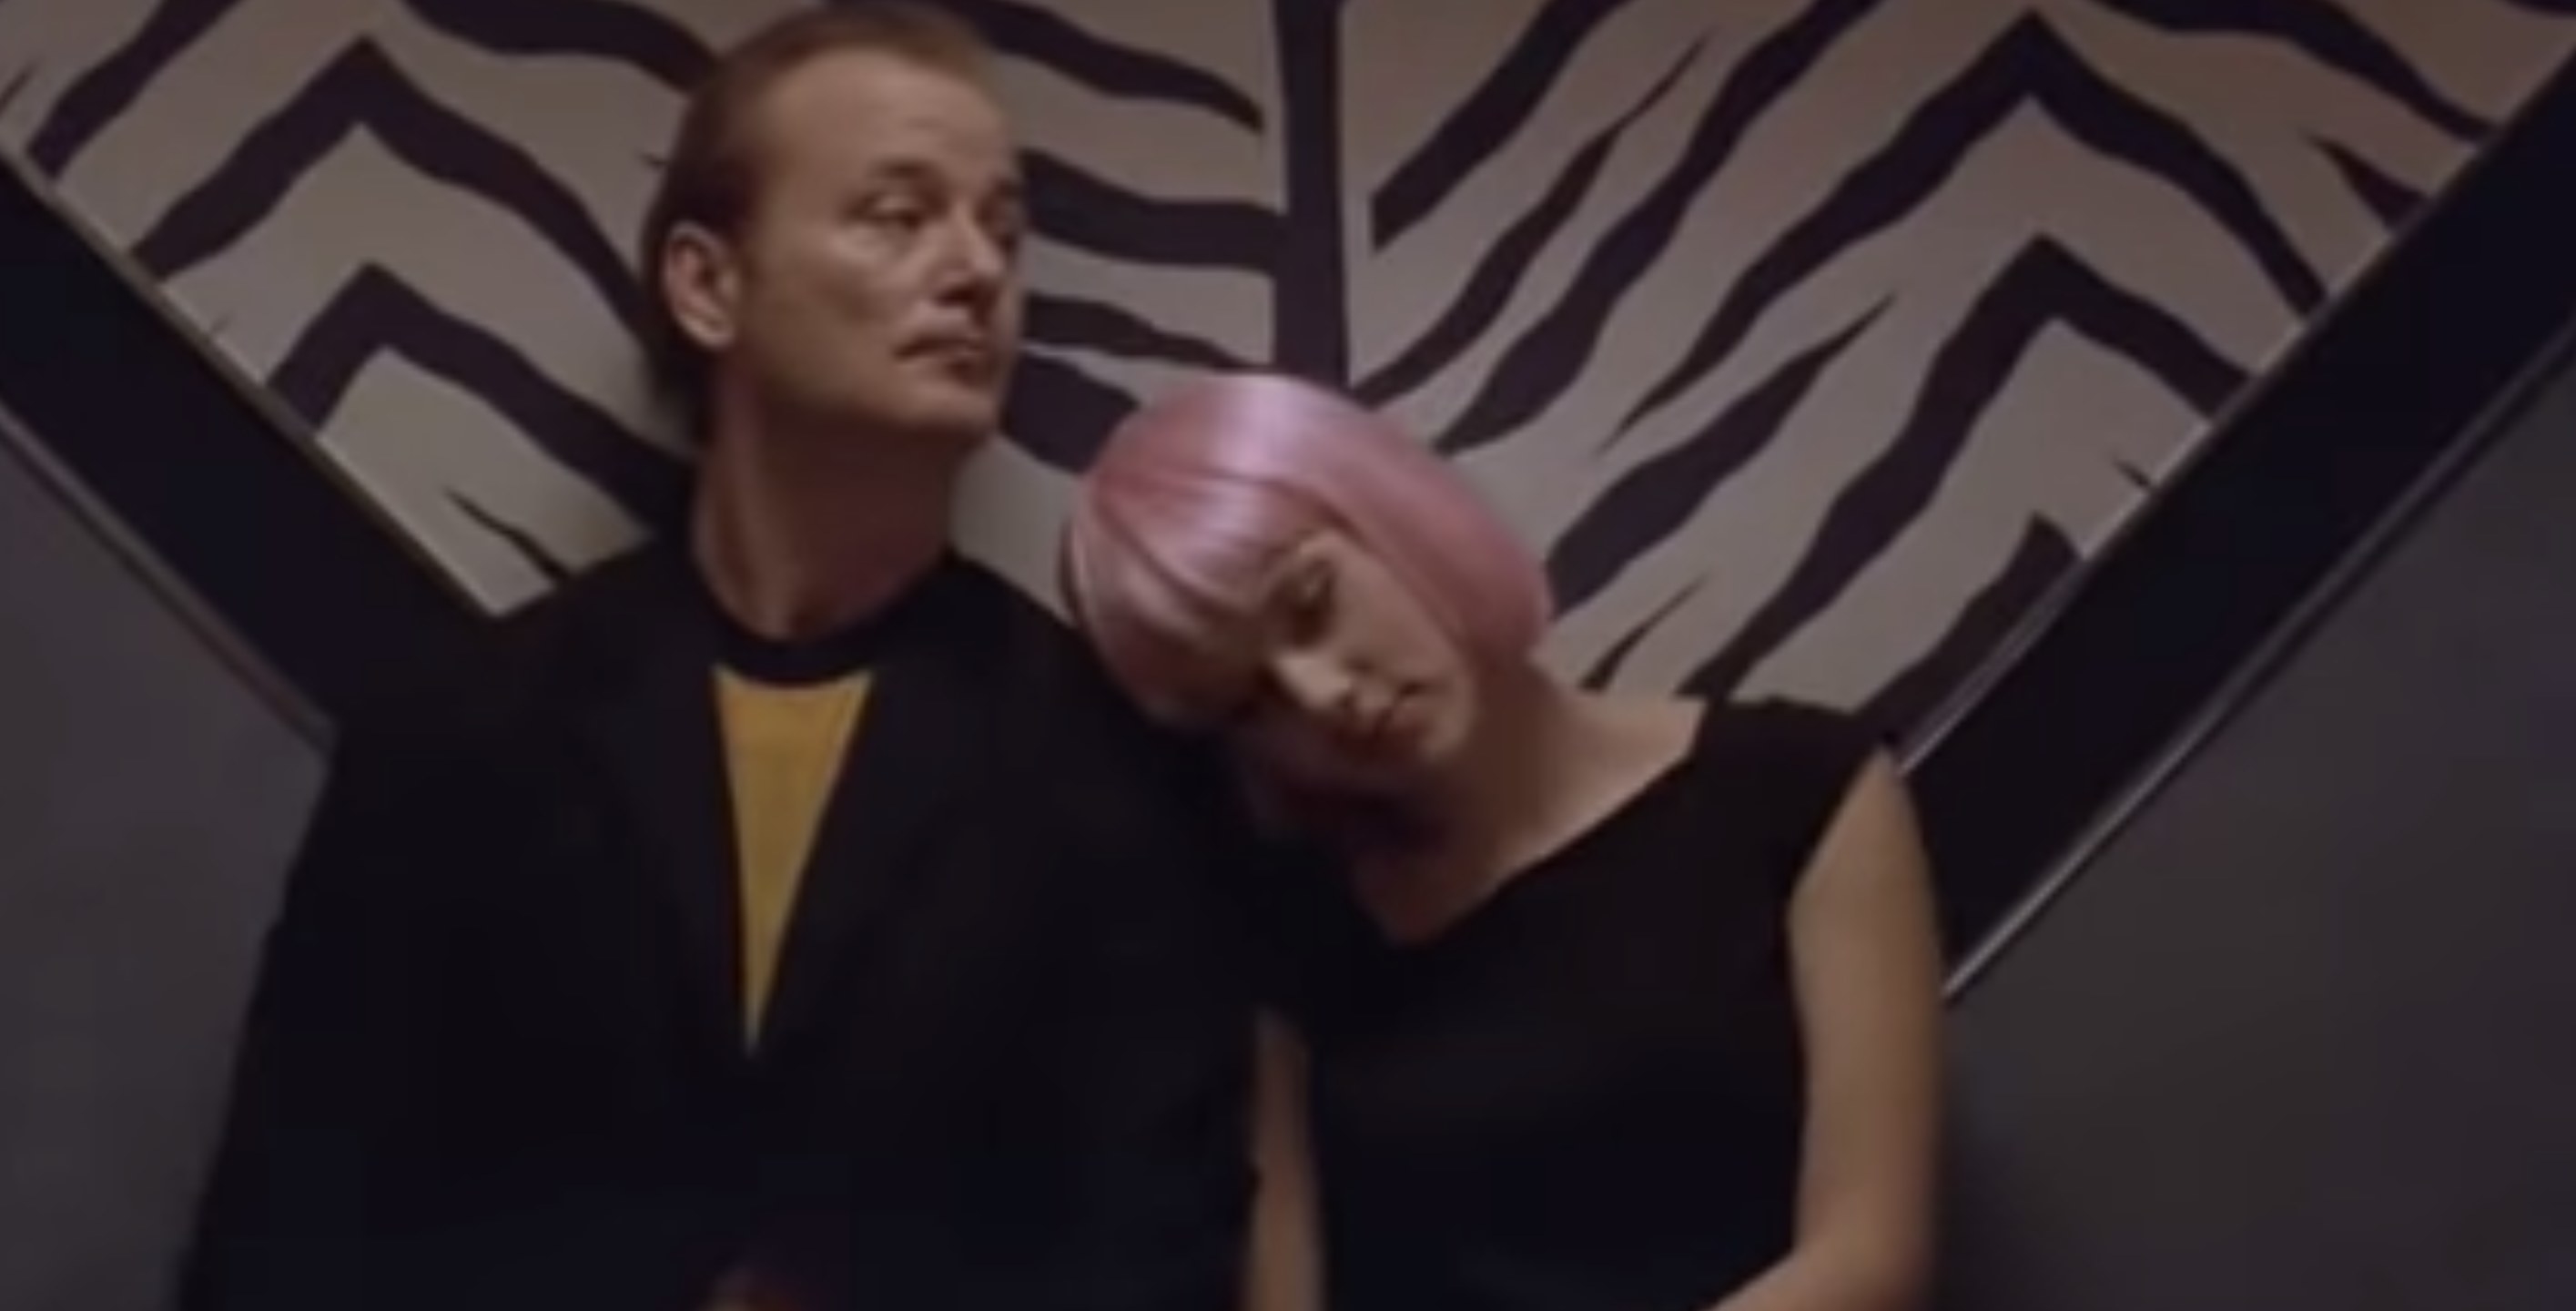 A man played by Bill Murray is with a girl in a pink wig played by Scarlett Johansson